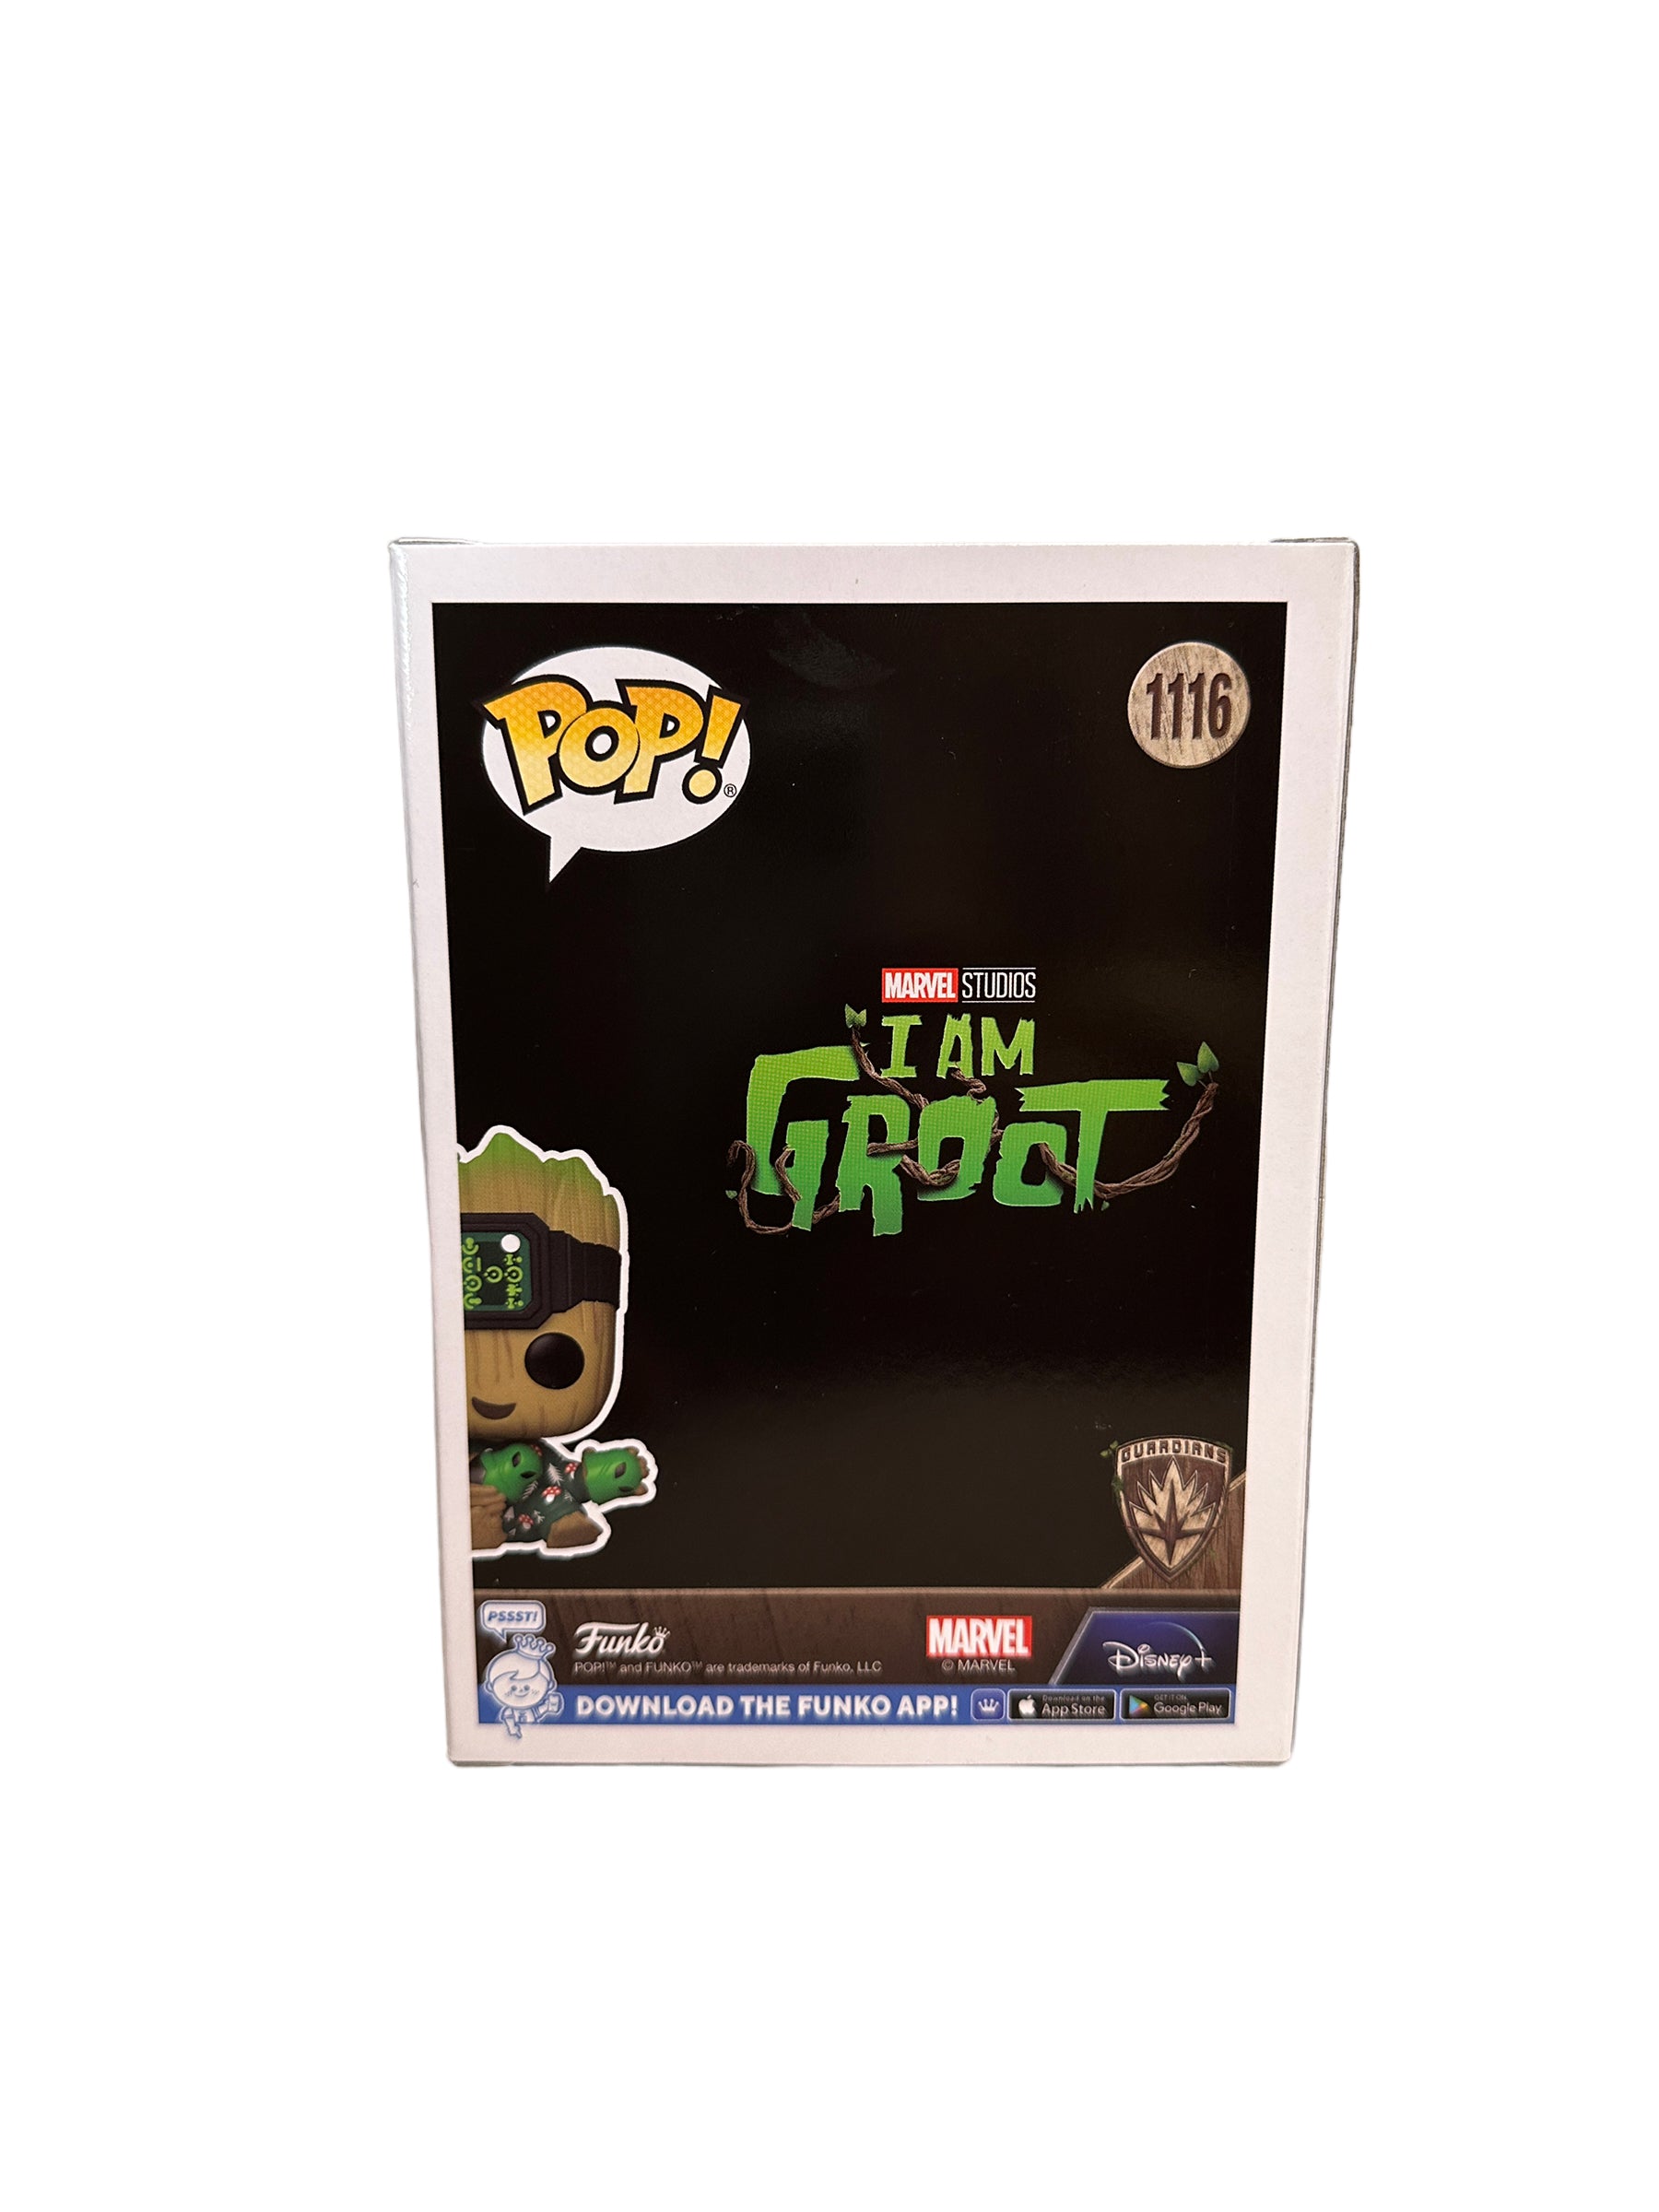 Groot #1116 (w/ Light) Funko Pop! - I Am Groot - NYCC 2022 Official Convention Exclusive - Condition 9.5/10